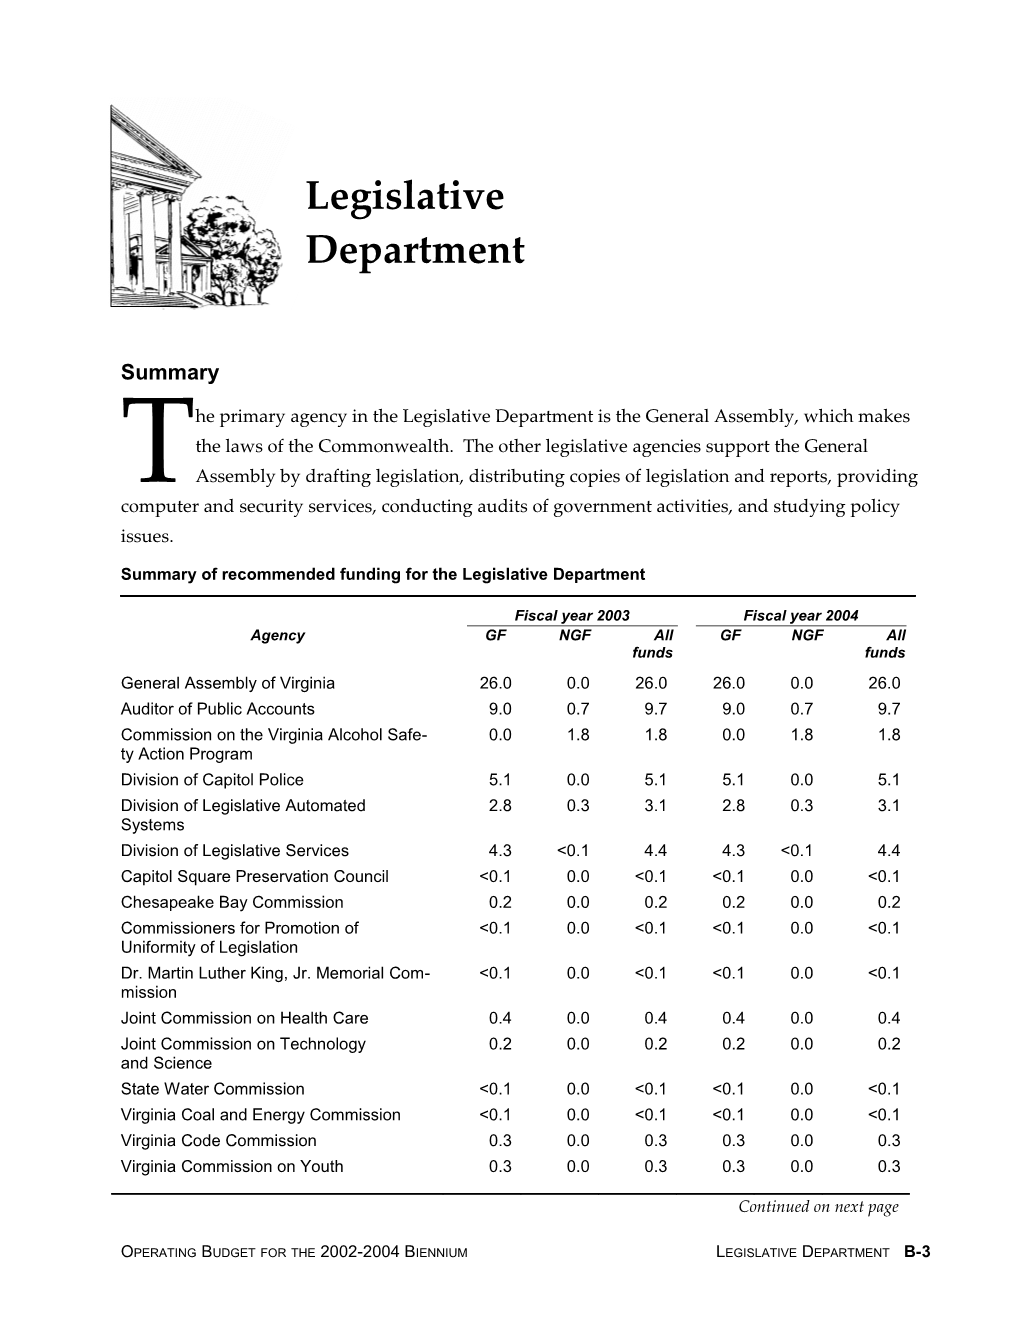 Summary of Recommended Funding for the Legislative Department